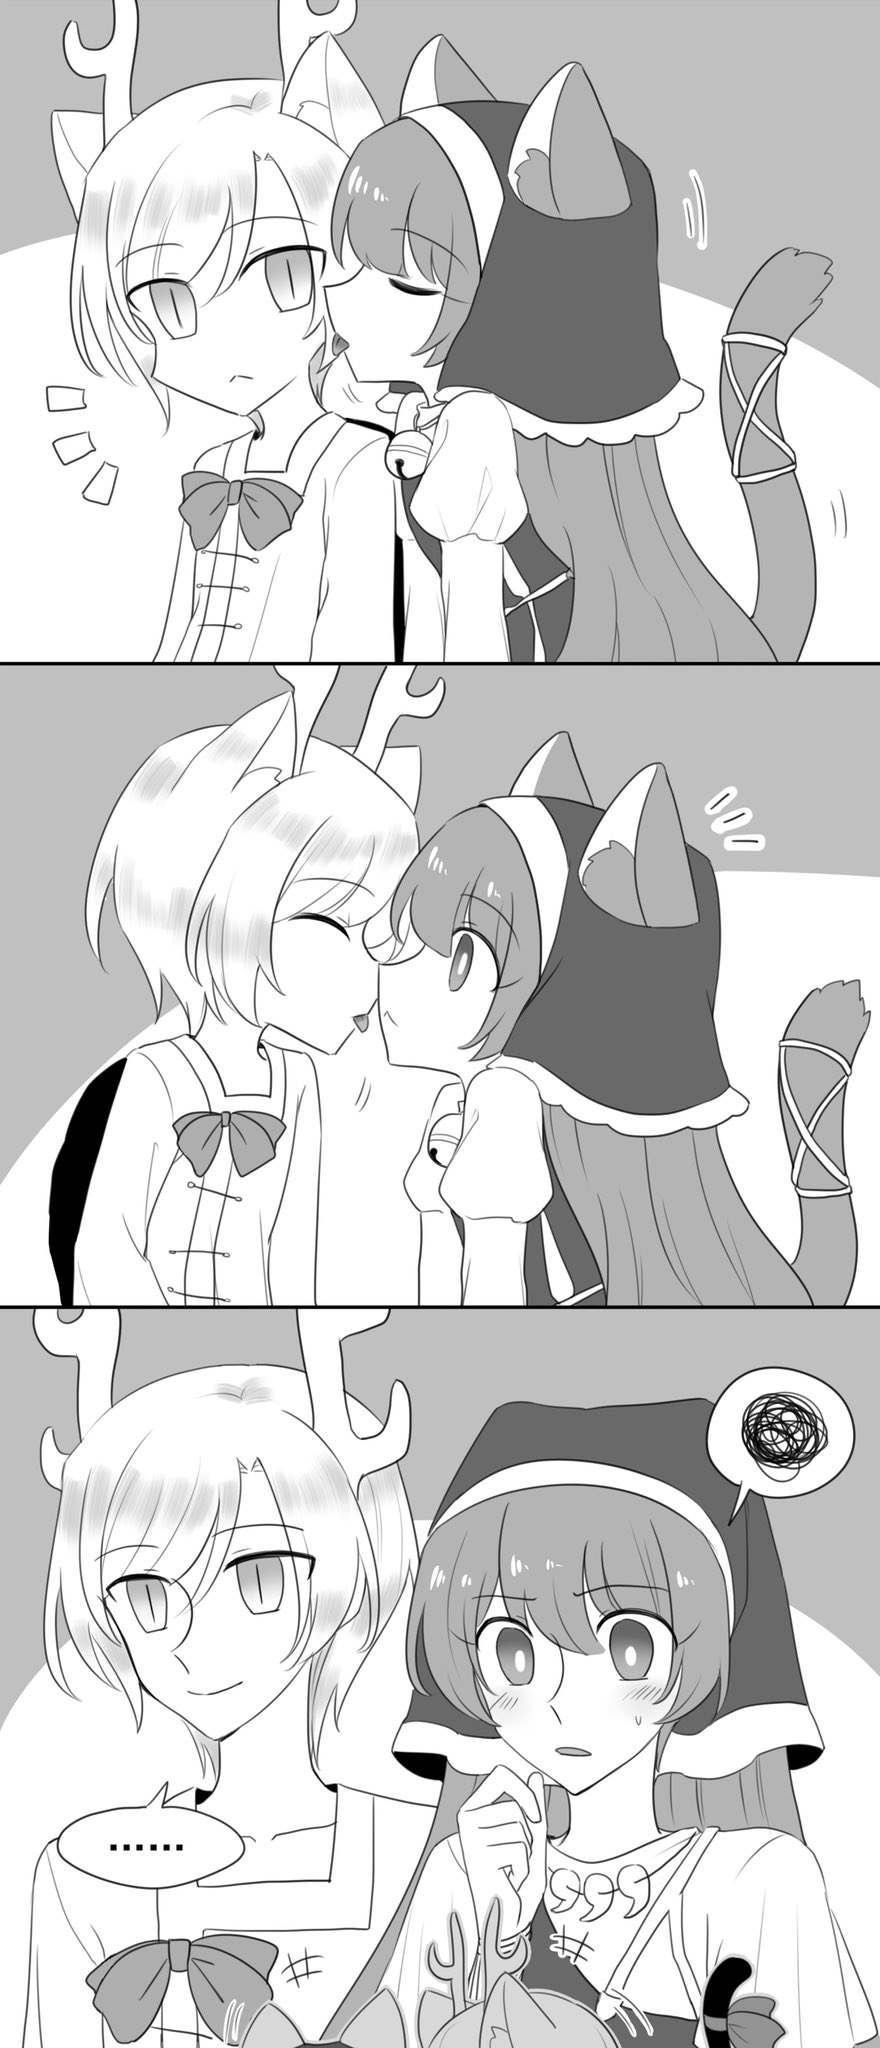 ... 2girls animal_ears antlers apron bell blush bow cat_ears cat_tail comic greyscale haniyasushin_keiki head_scarf highres jewelry jingle_bell kicchou_yachie licking licking_another's_cheek licking_another's_face long_hair magatama magatama_necklace mask_(boring_mask) monochrome multiple_girls necklace short_hair slit_pupils smile surprised tail tail_bow tail_ornament touhou turtle_shell yuri